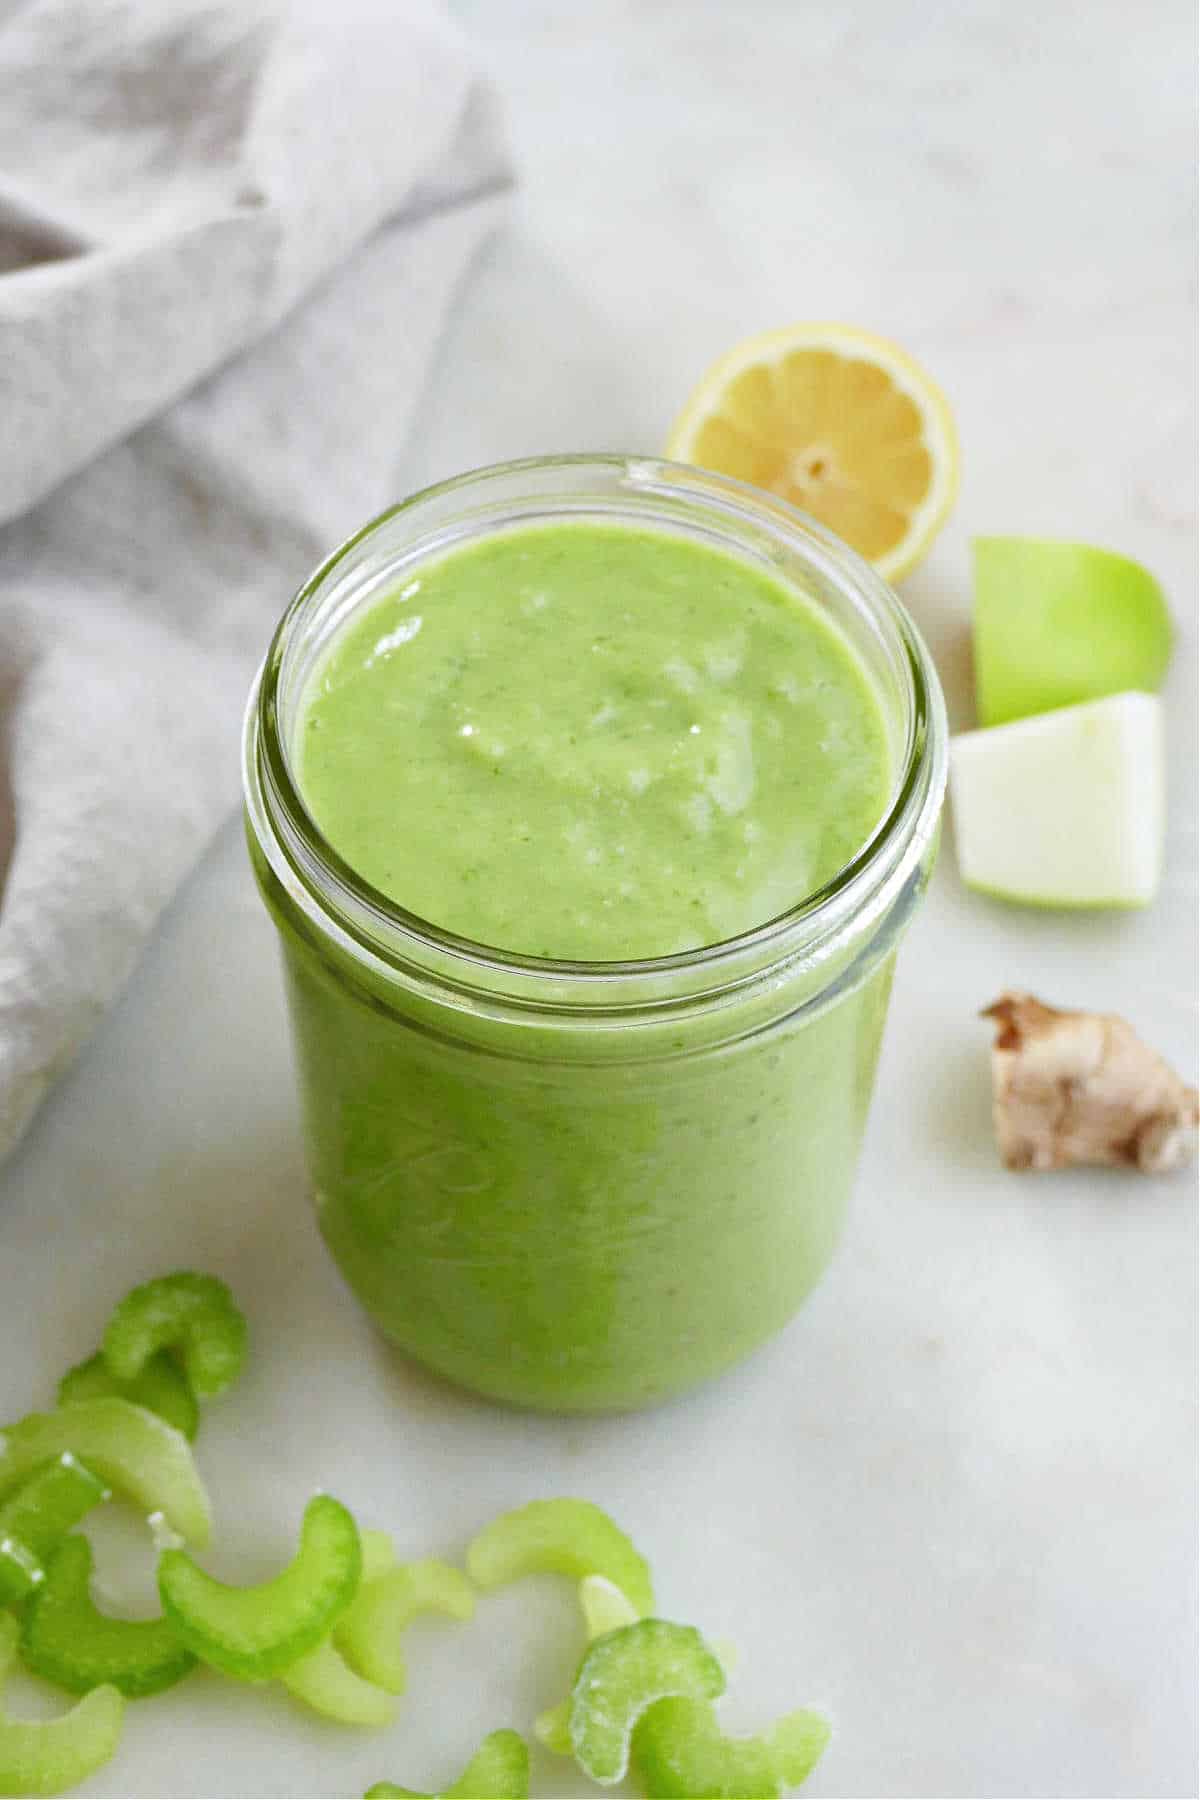 green smoothie made from celery in glass jar on a counter next to ingredients